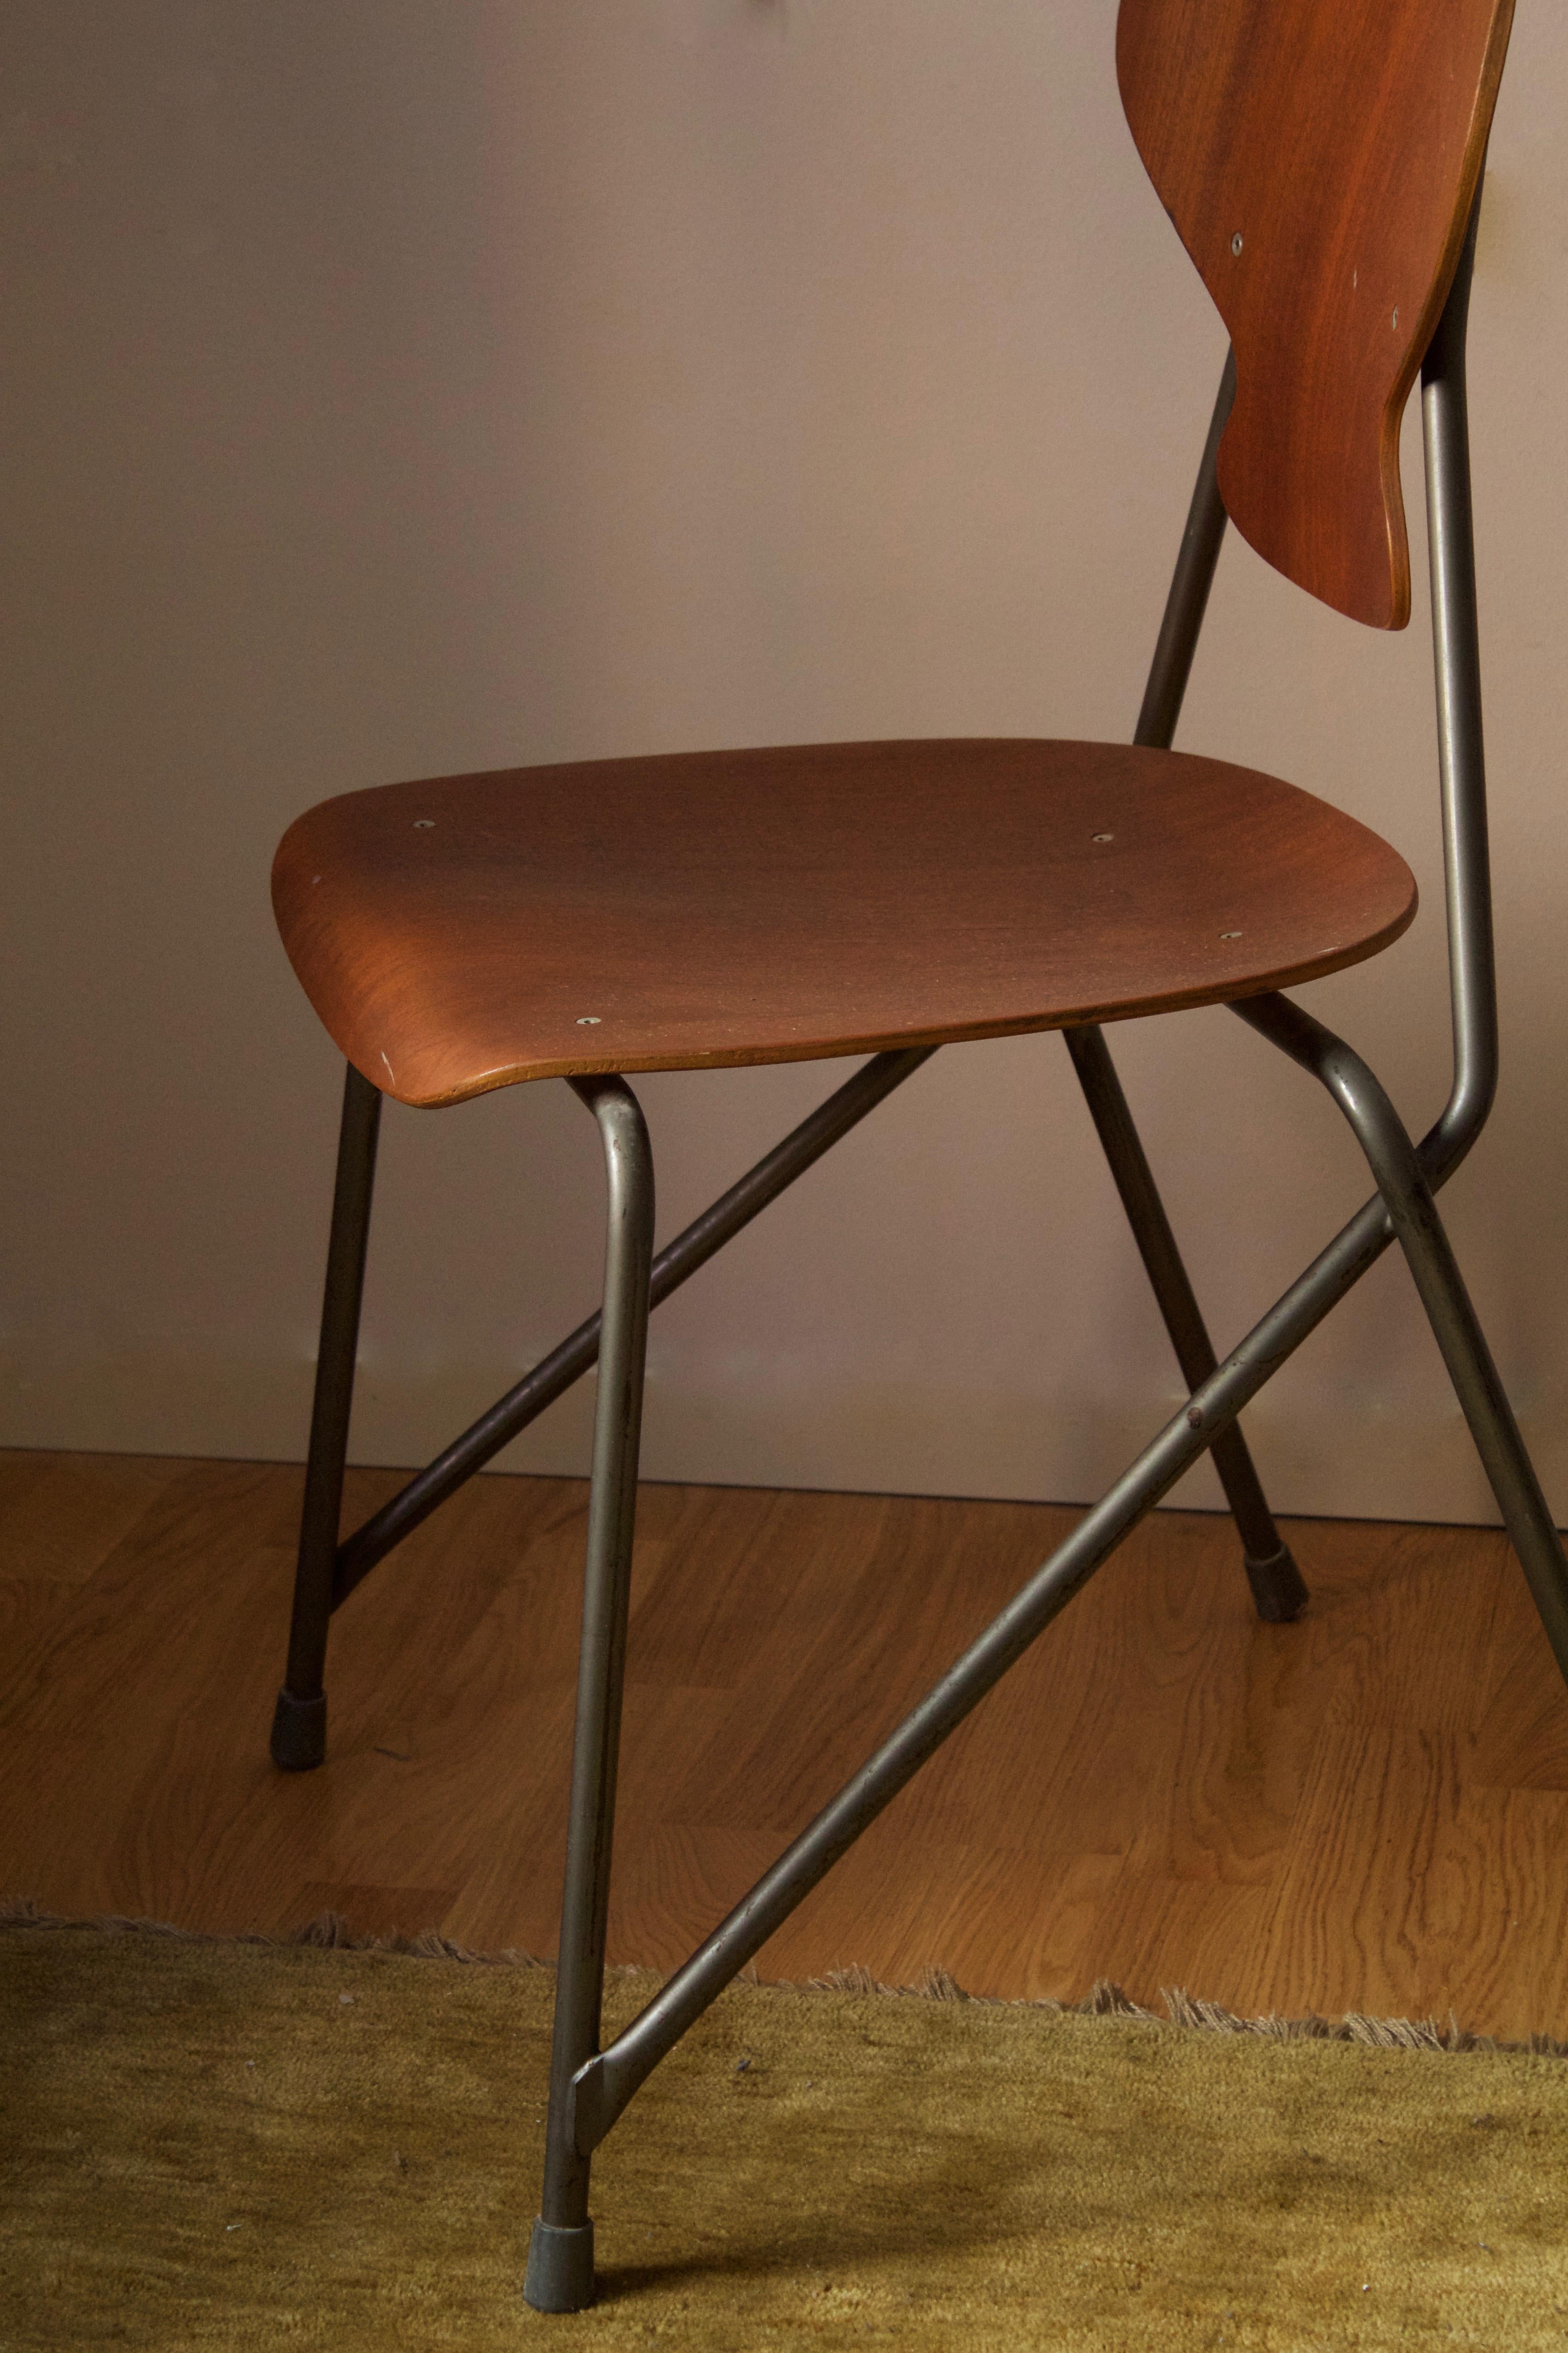 Steen Eiler Rasmussen, Side Chair from Rungsted Skole, Metal, Oak, Denmark, 1954 In Fair Condition For Sale In High Point, NC